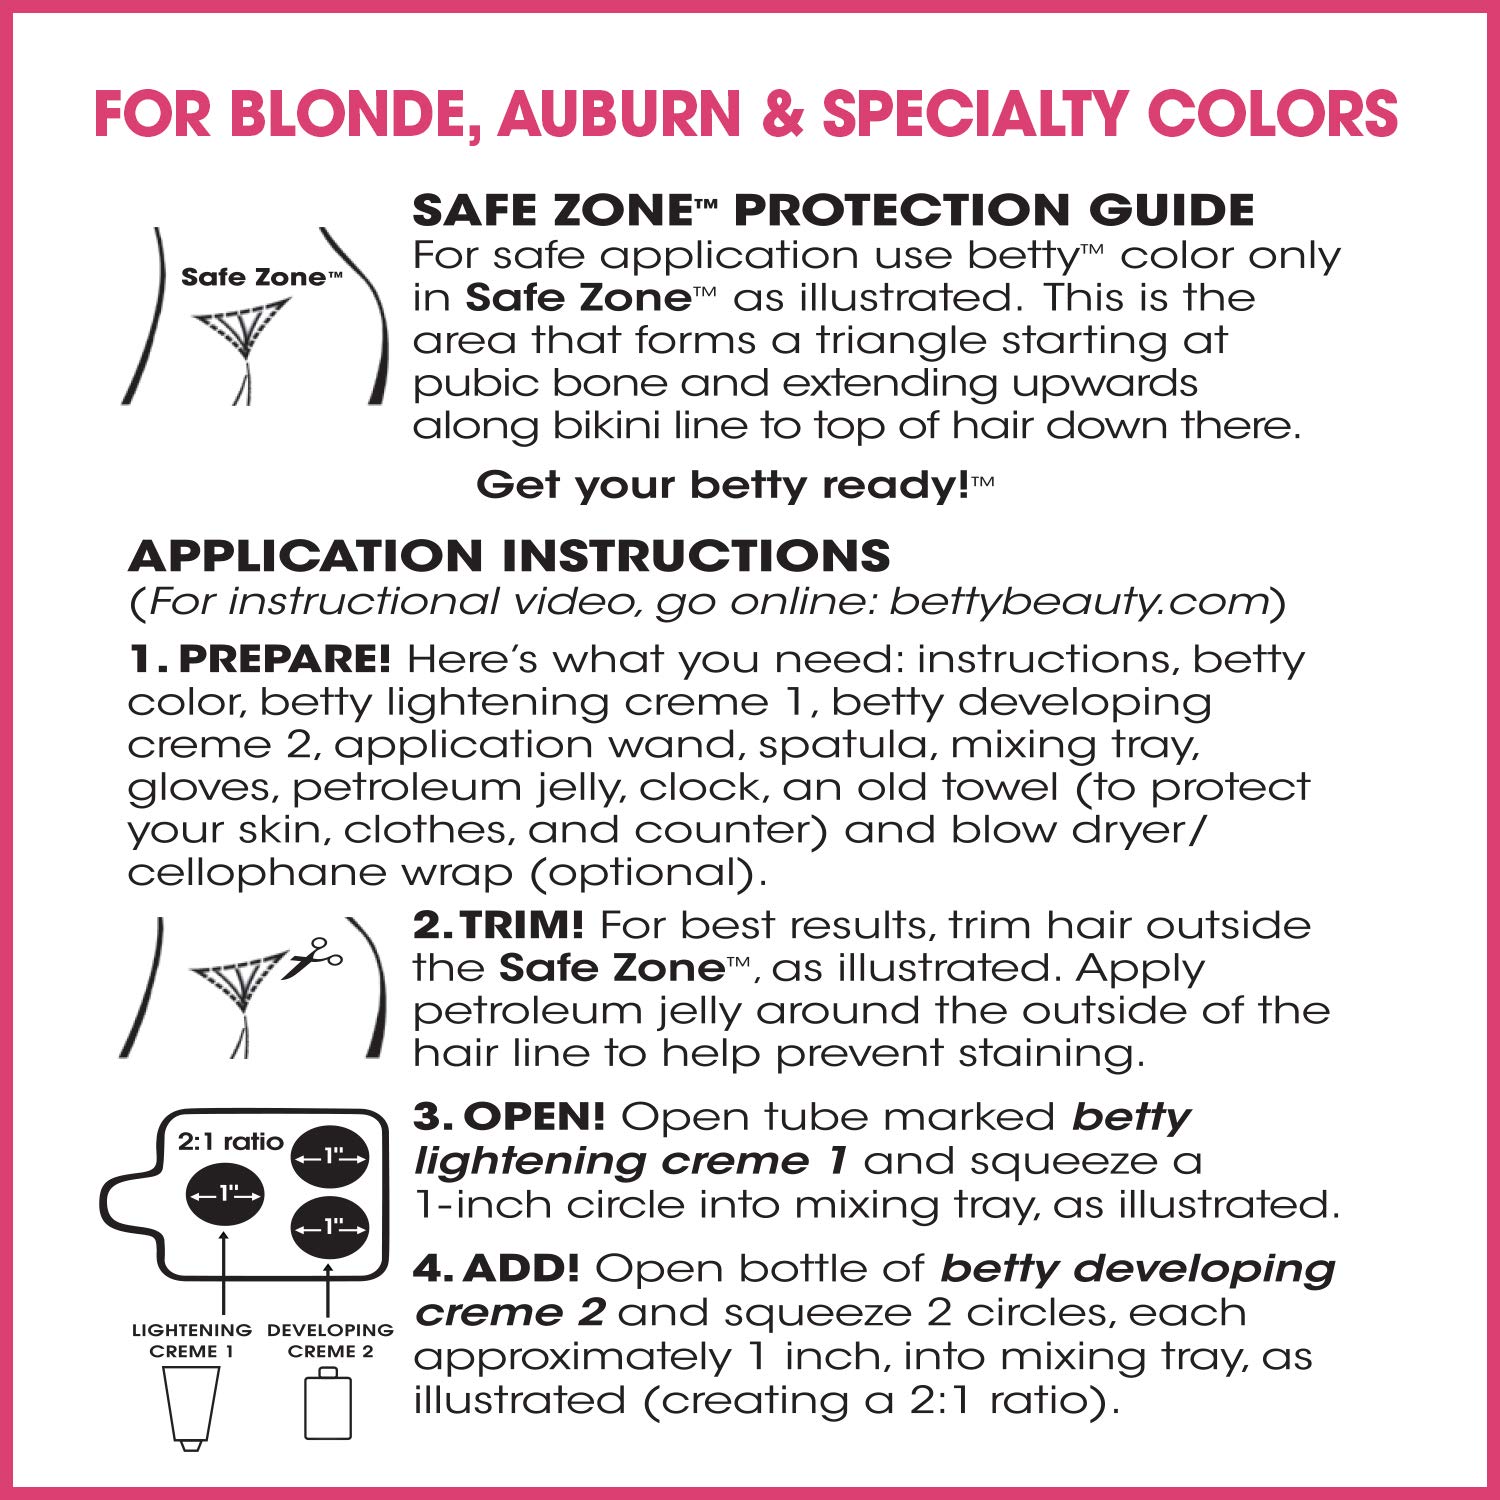 Auburn Betty -Hair Color for the Hair Down There Kit